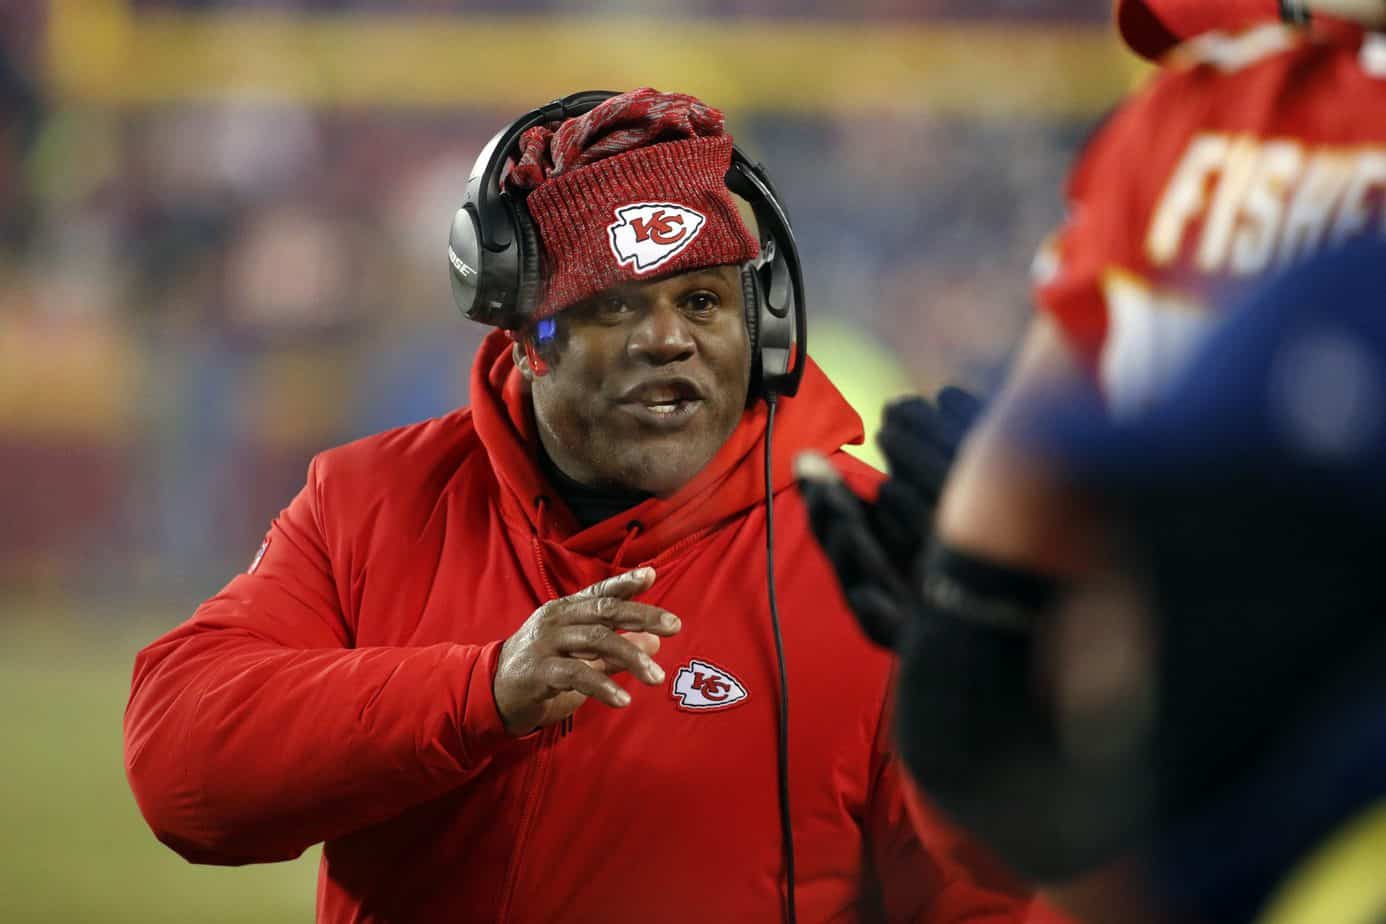 According to a report, Chiefs OC Eric Bieniemy may take a coordinator job elsewhere with his contract with Kansas City set to expire